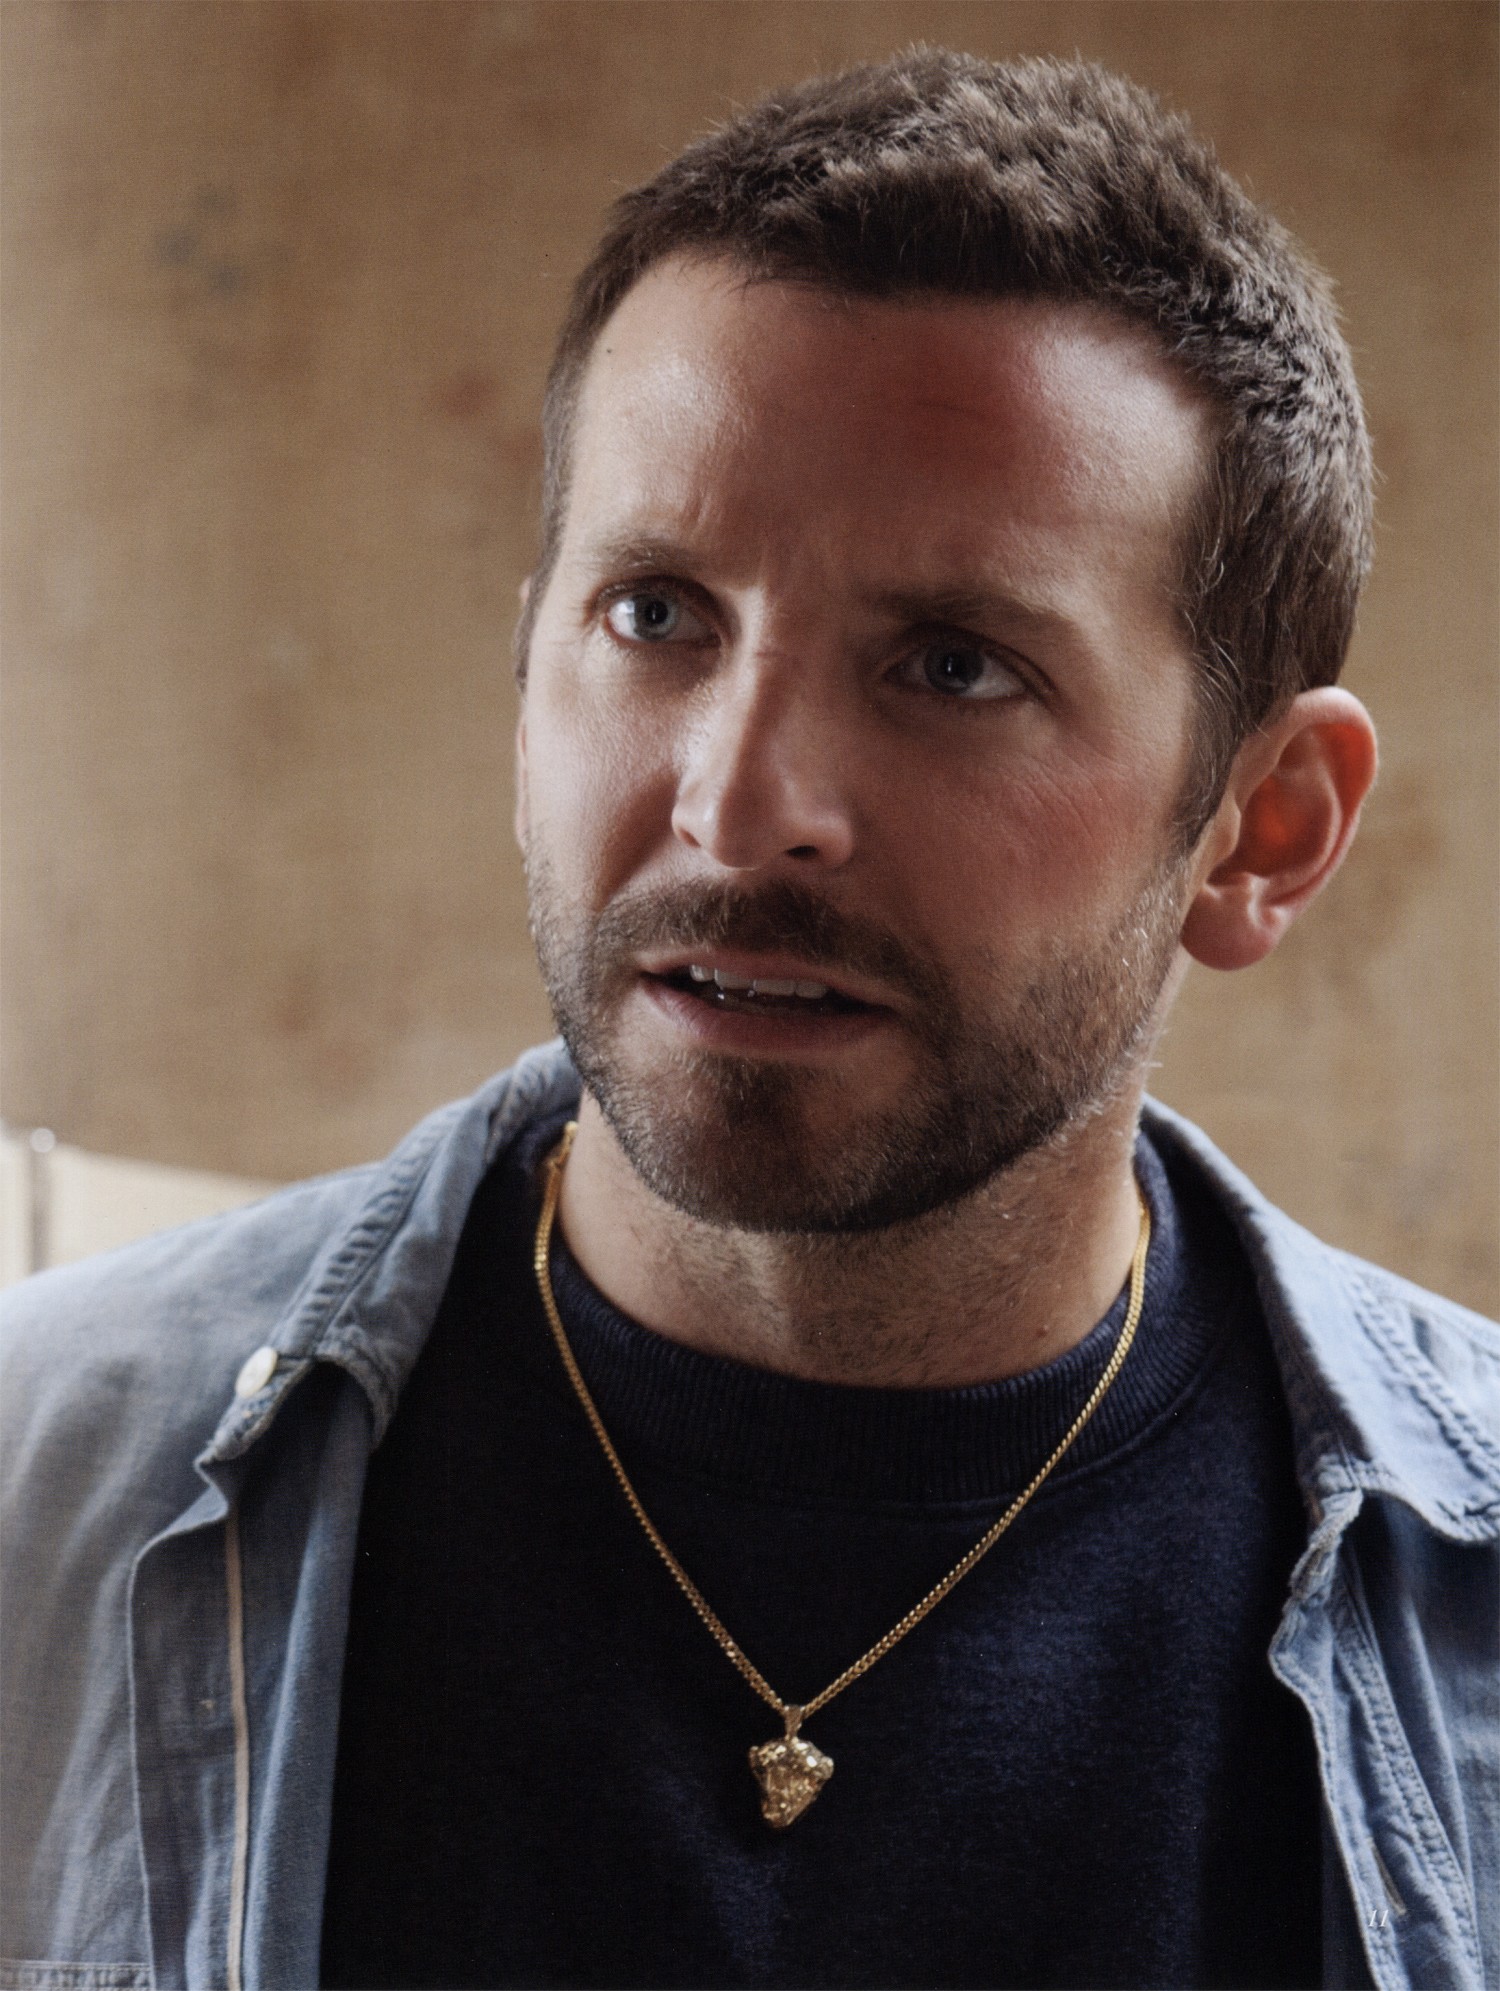 Bradley Cooper stars as Pat Solitano in The Weinstein Company's Silver Linings Playbook (2013)